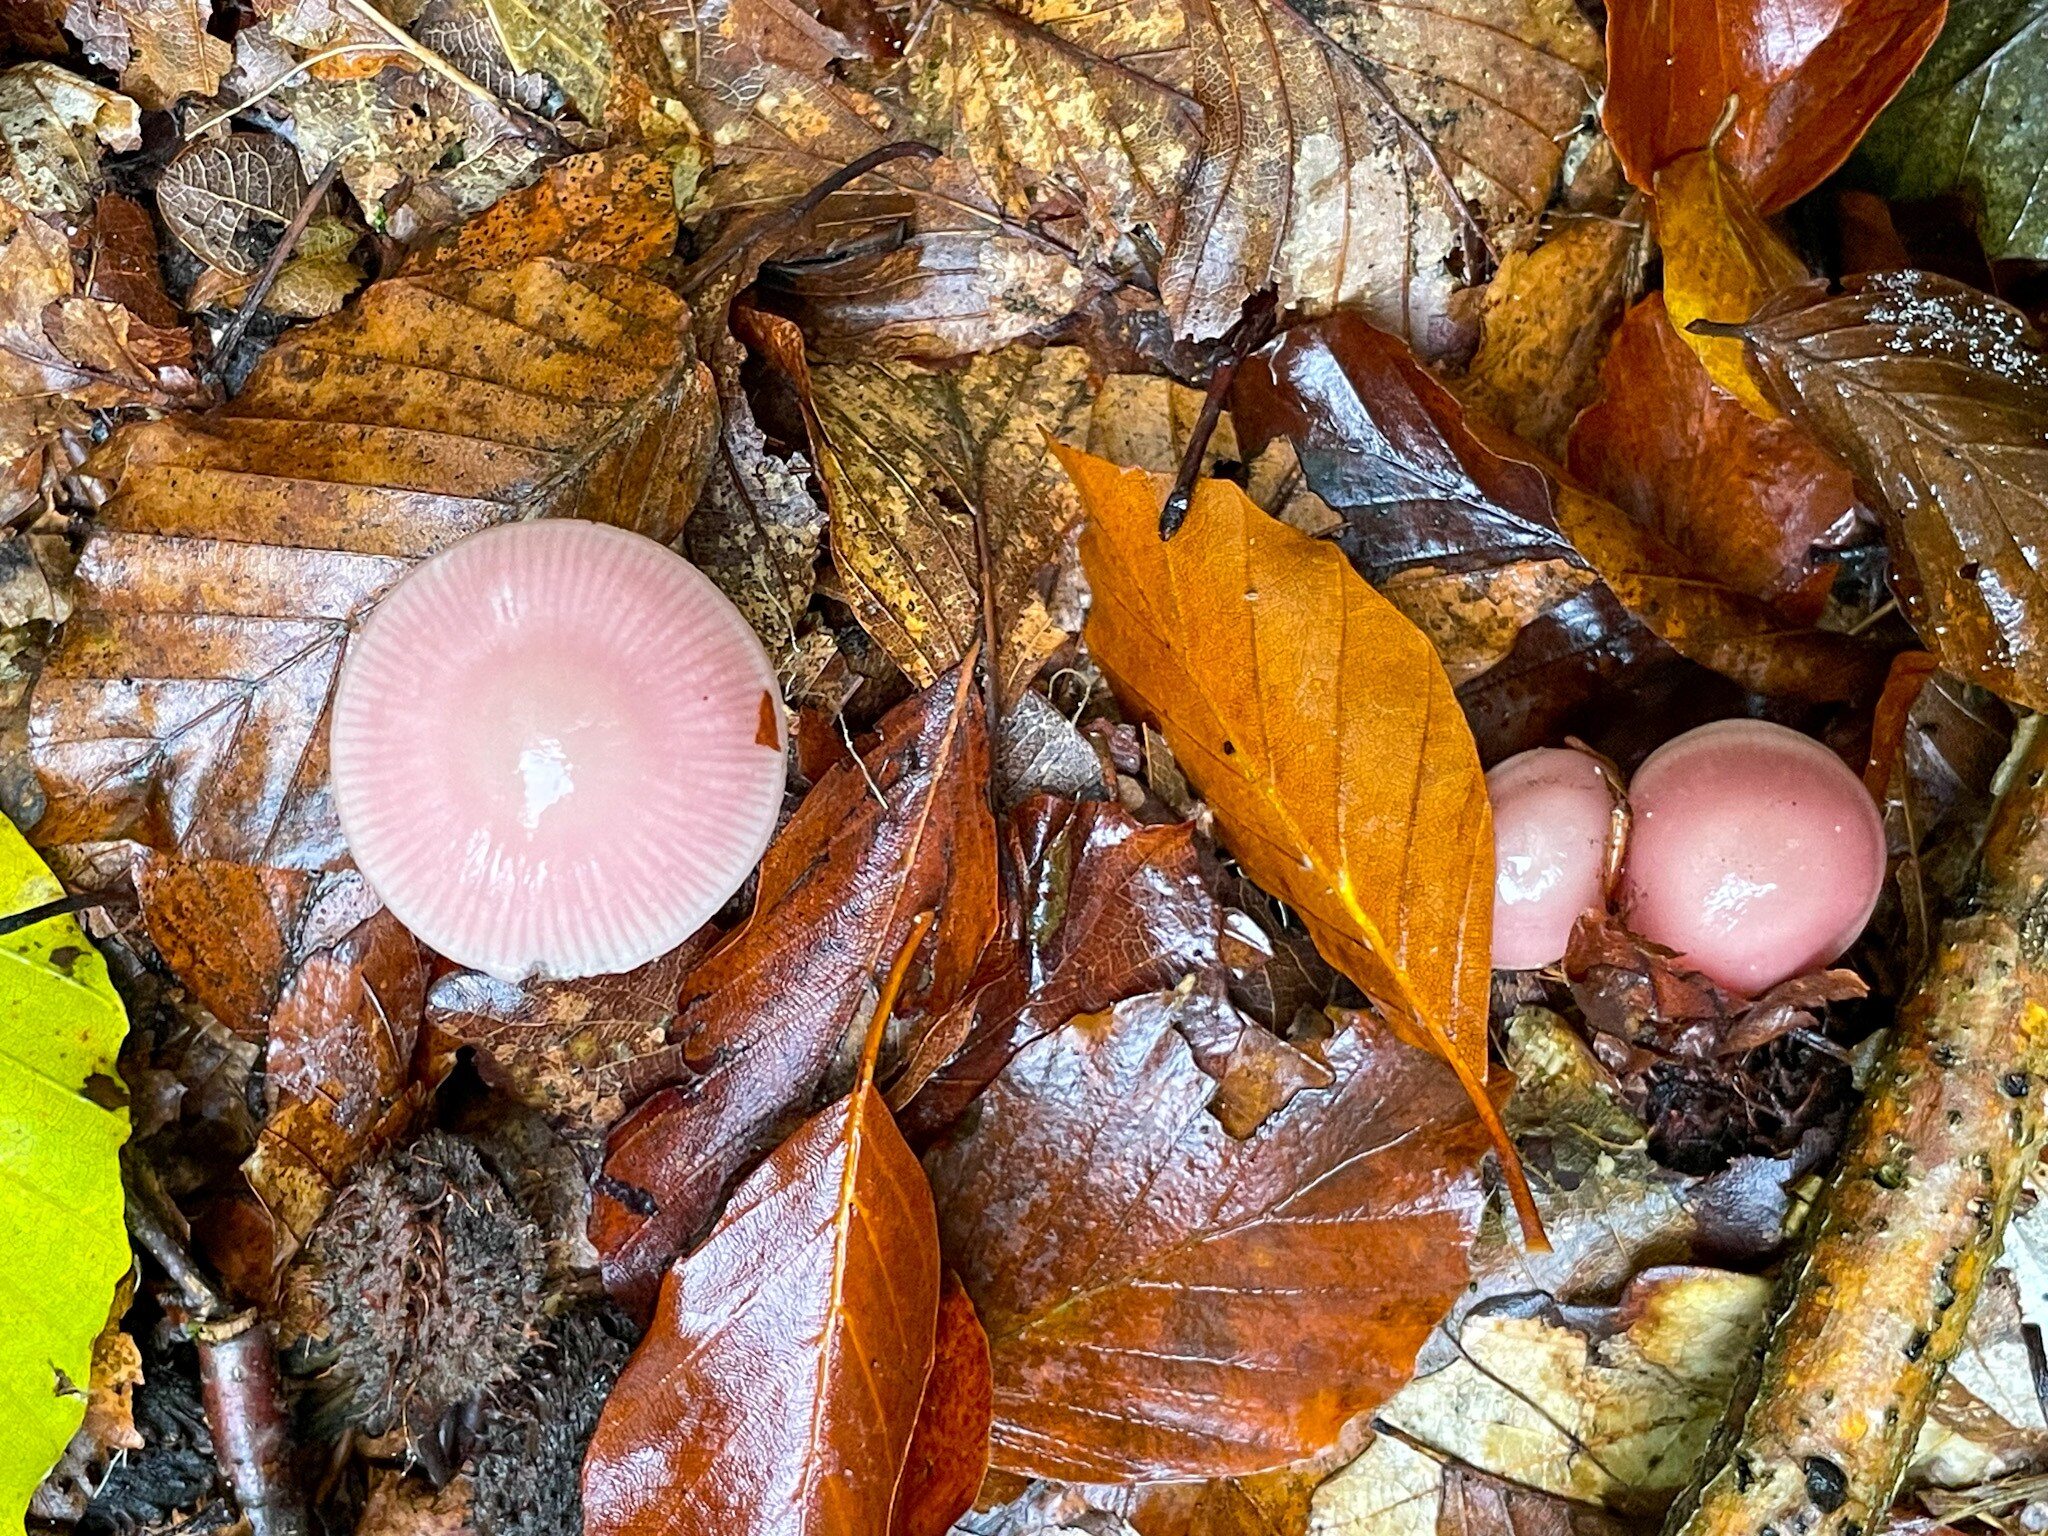 I found pink mushrooms in a Polish forest.  They better not end up in the cart